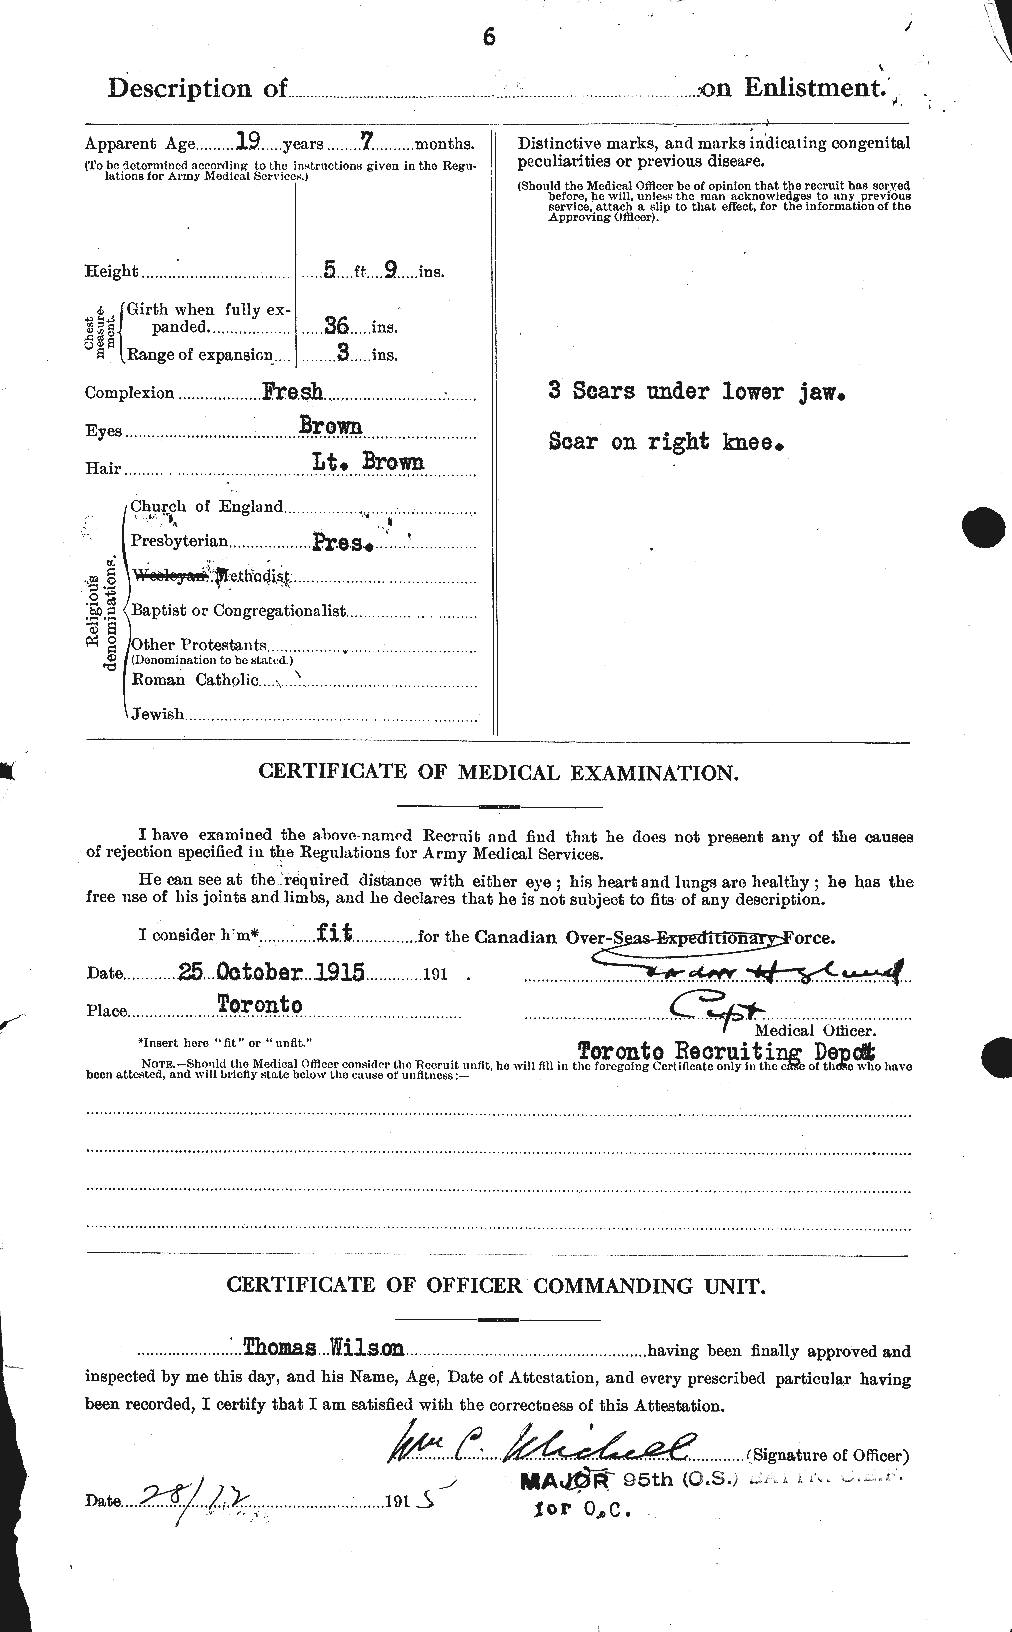 Personnel Records of the First World War - CEF 681202b